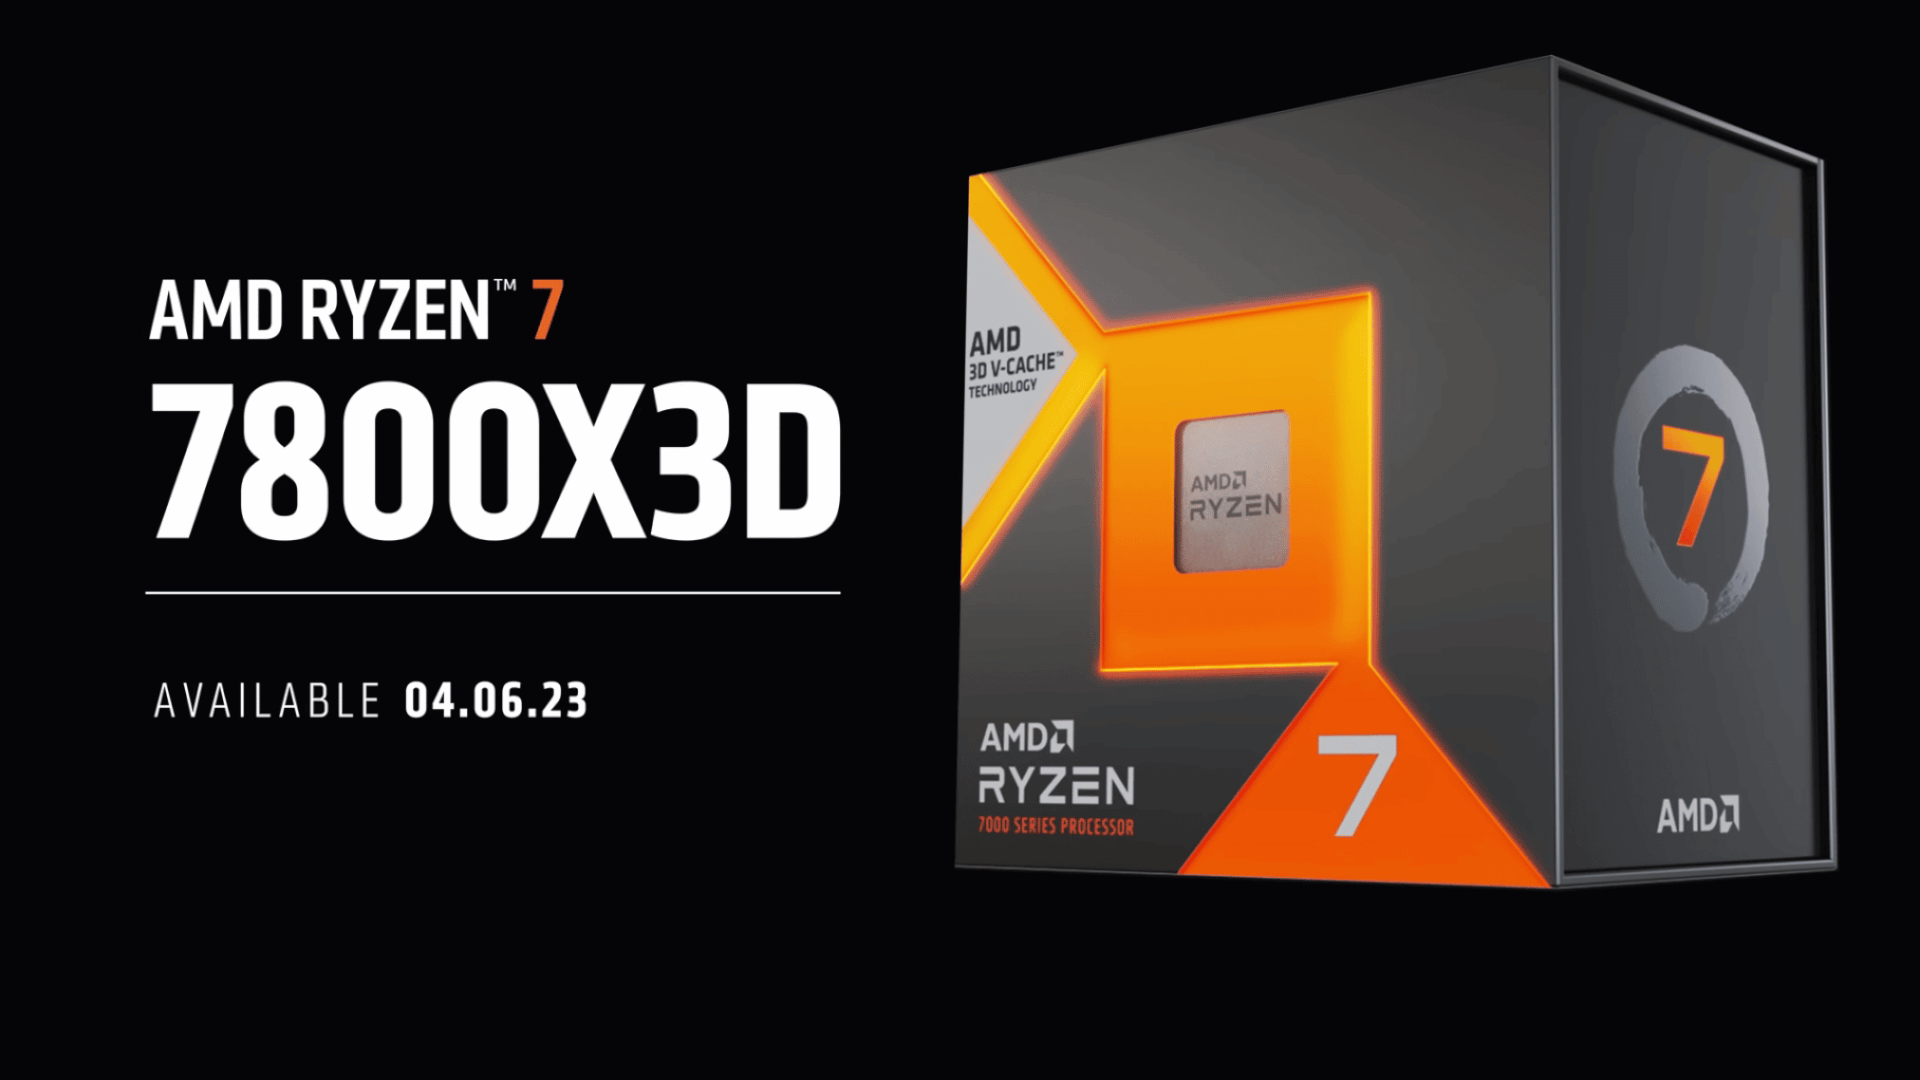 AMD Ryzen 7 7800X3D is Selling 3x More than Intel's Entire 13th Gen Core  Lineup in Germany